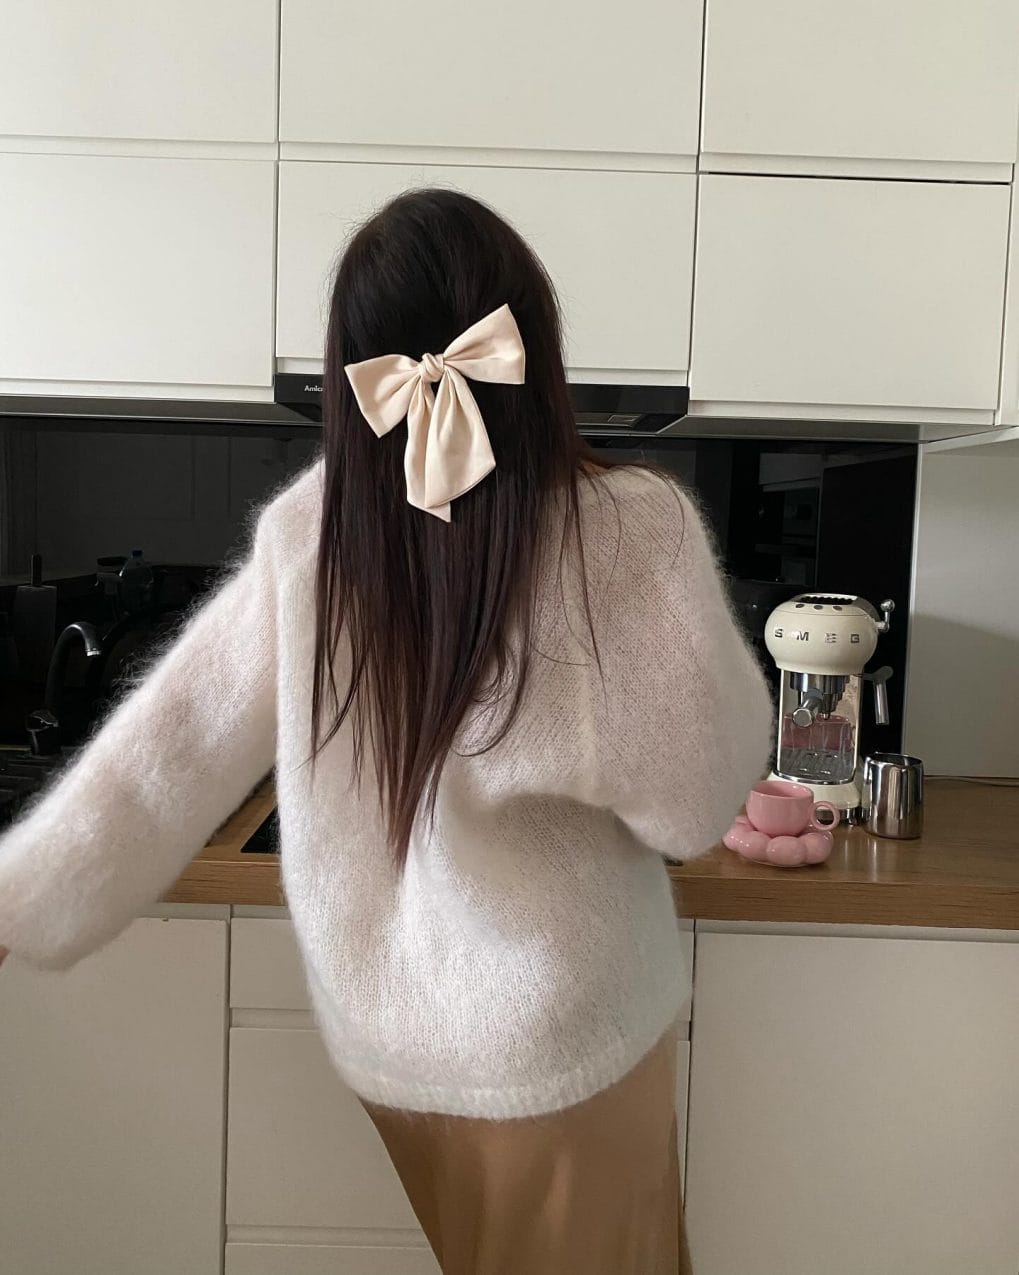 Long straight brunette tied with bow for a casual look